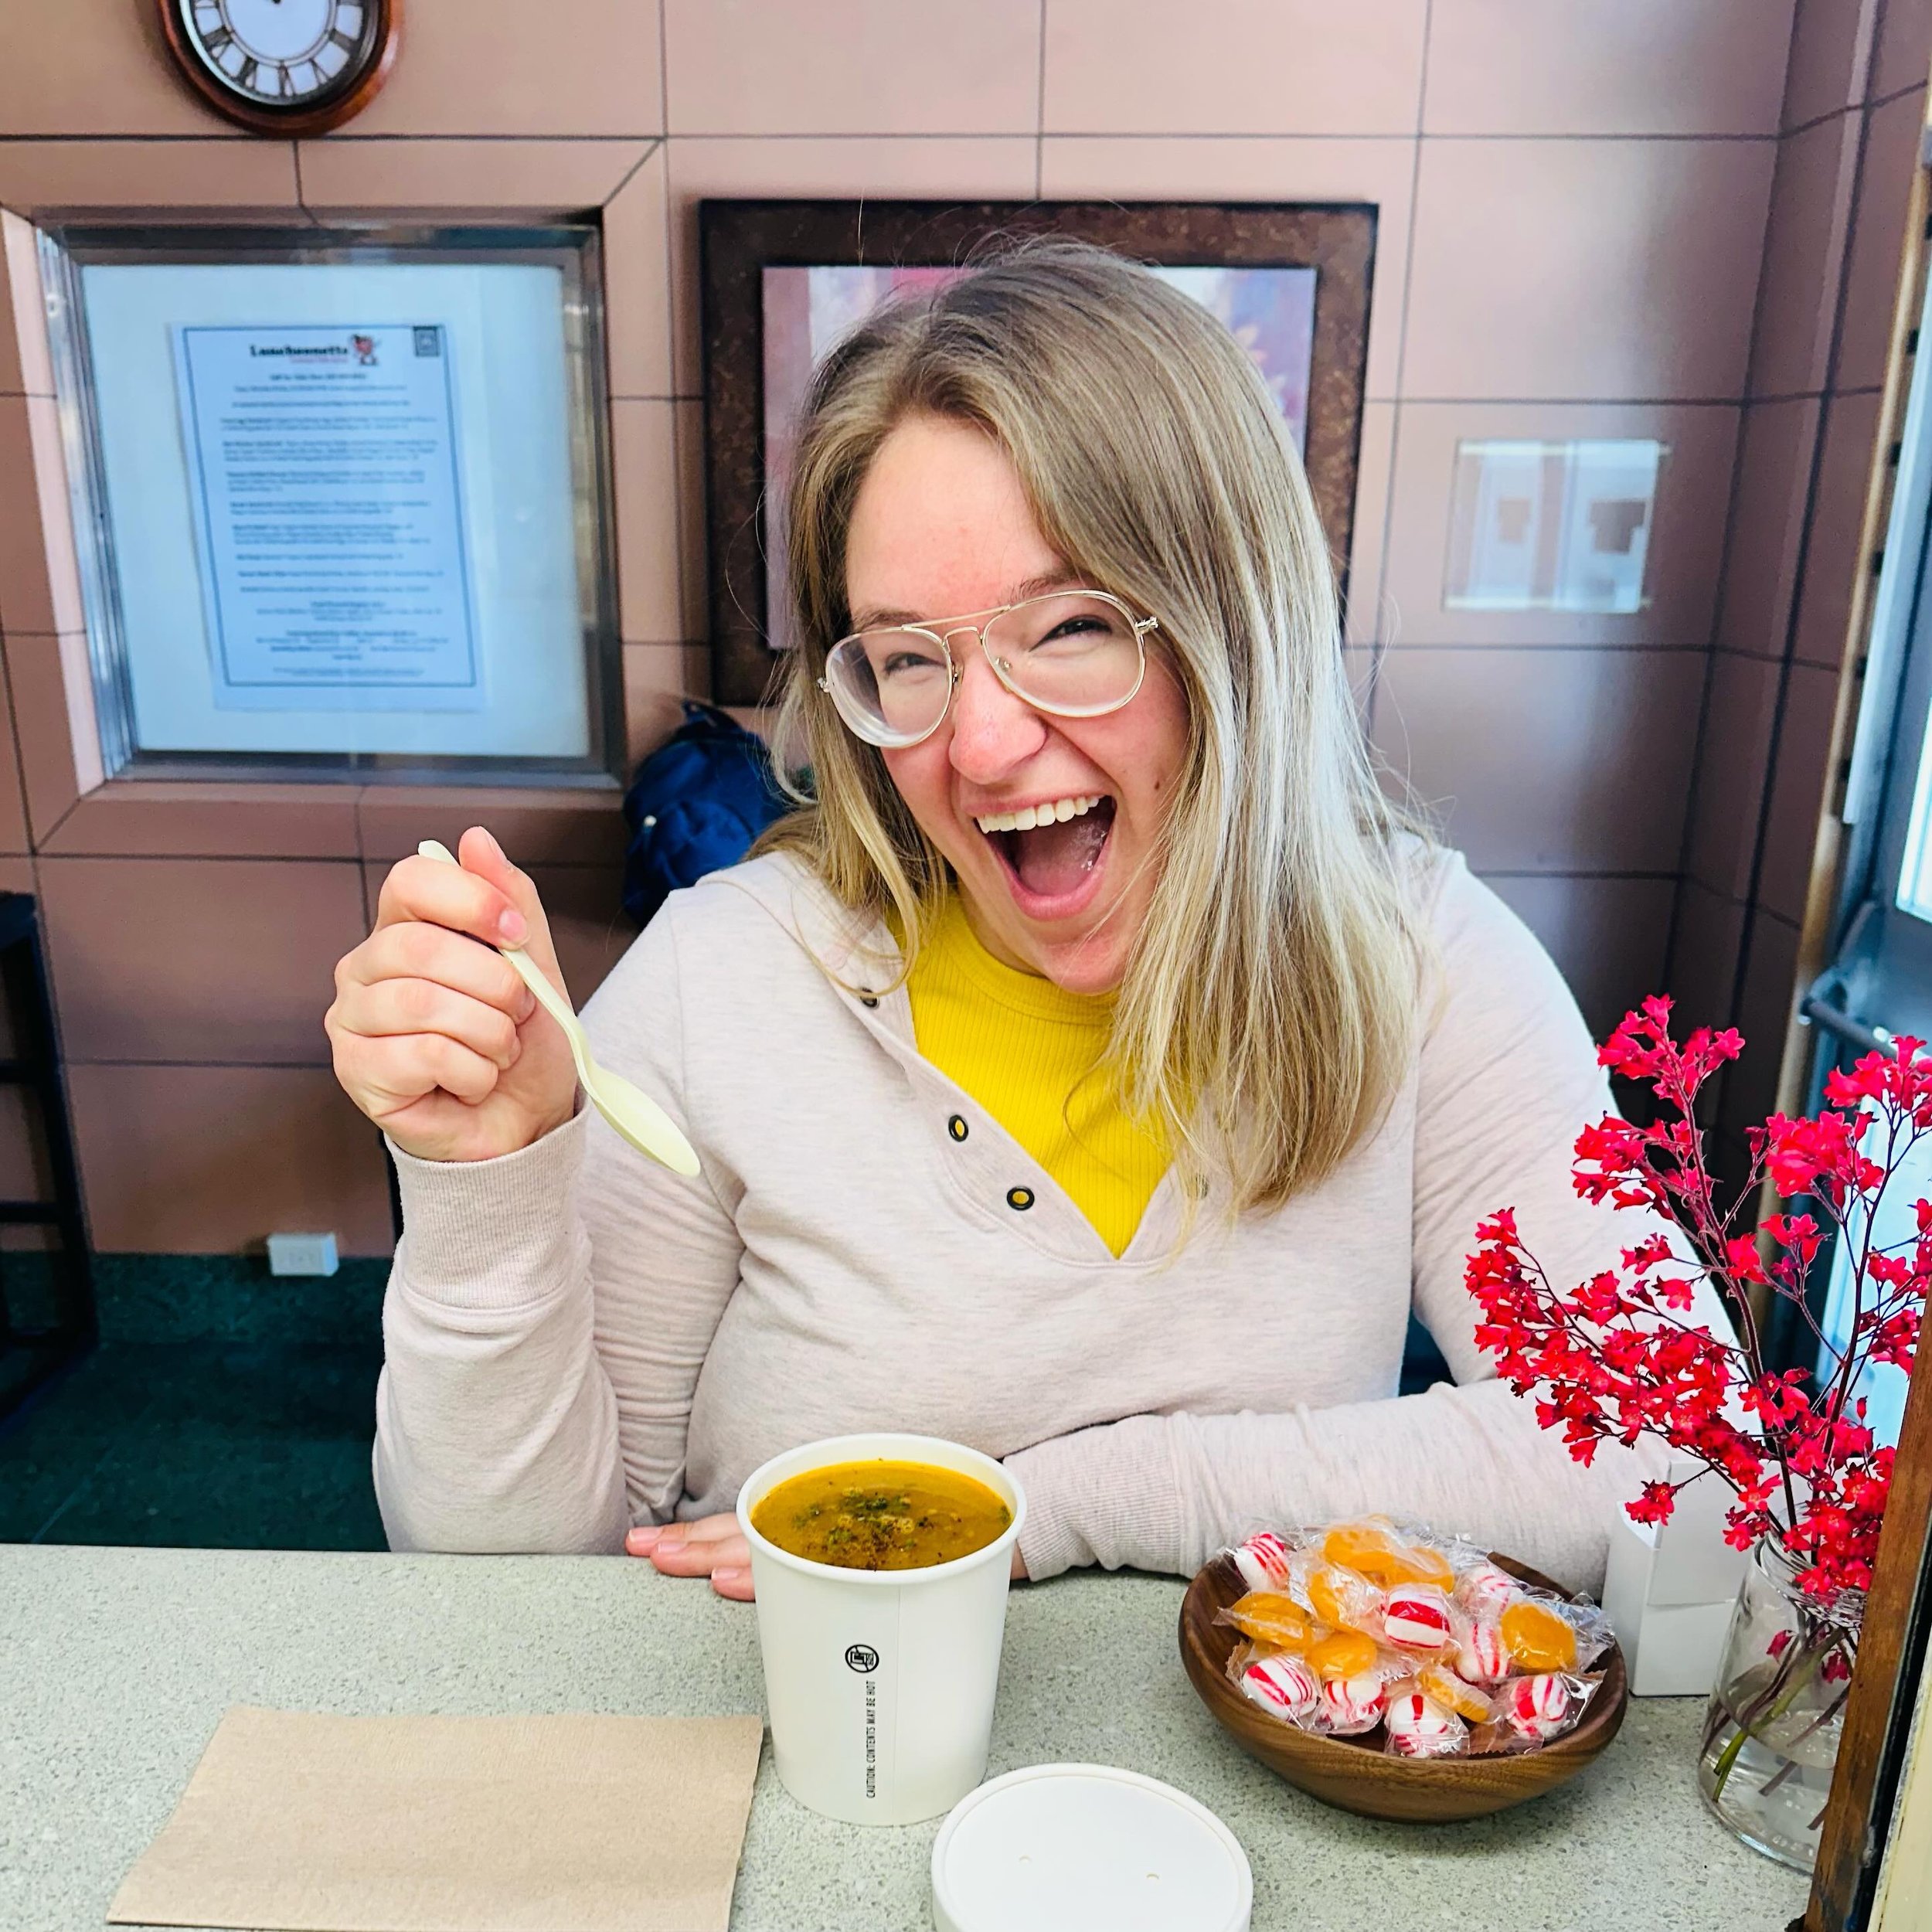 SOUPER HAPPY!! @hollyjolly_23 grabbed the last of this season&rsquo;s SOUP. 
#thatsawrap #soupisoverbutnotforever #seeyouinseptember #itwasgreatwhileitlasted #menuchangecomingsoon #happyluncheonette